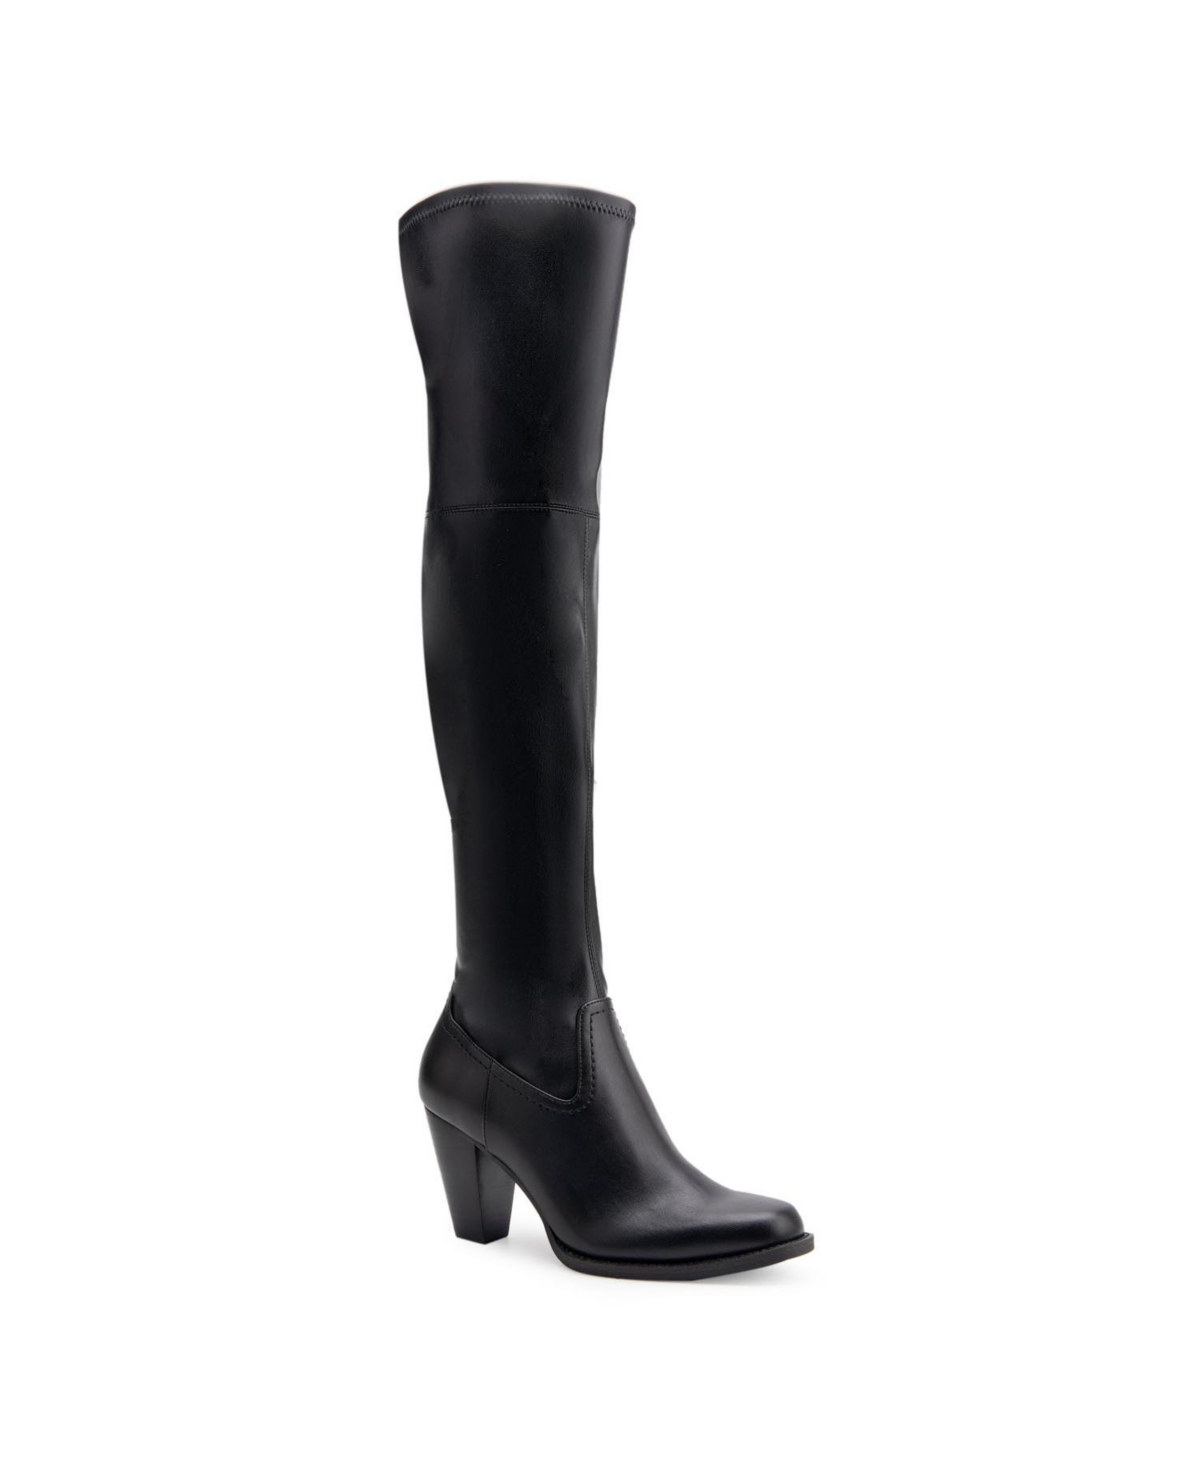 Women's Lewes Over The Knee Dress Boot - Black